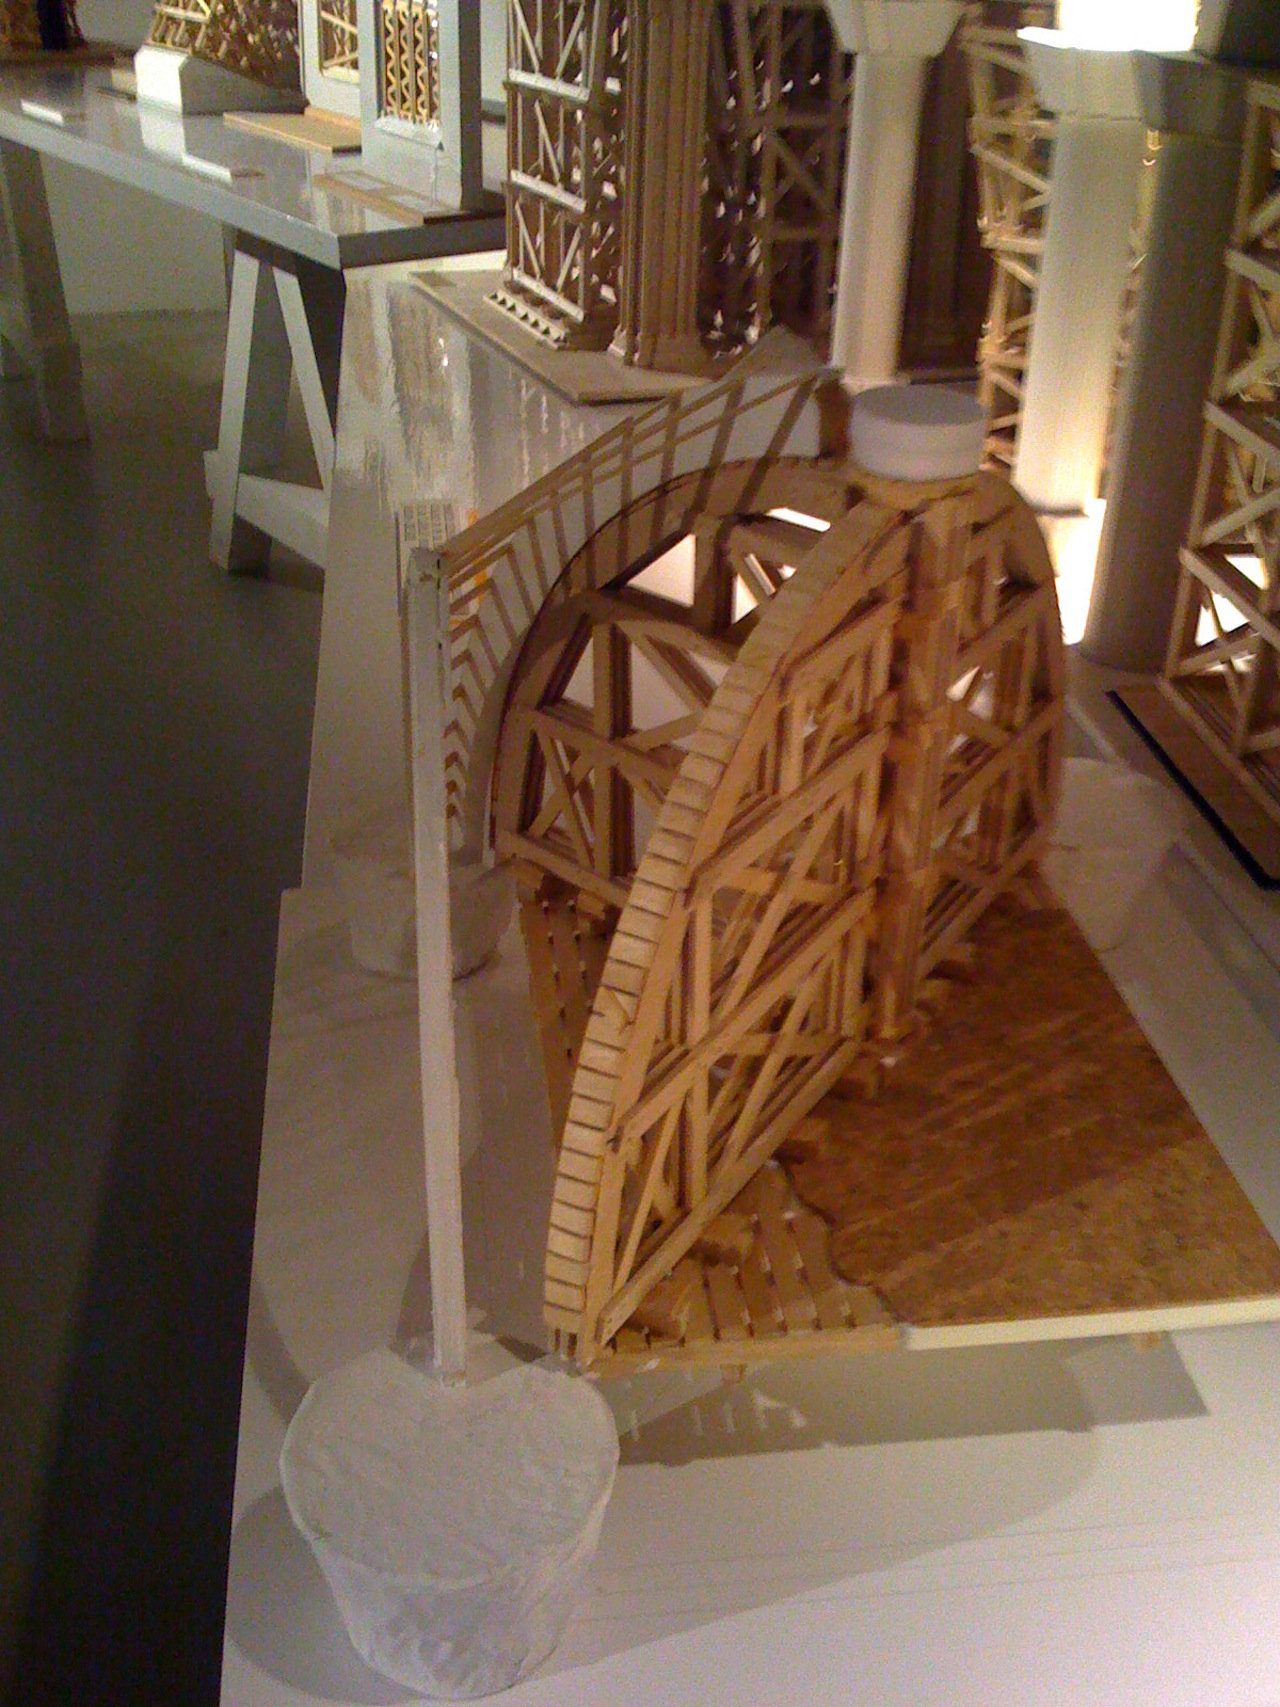 Biuso - Support wood structure